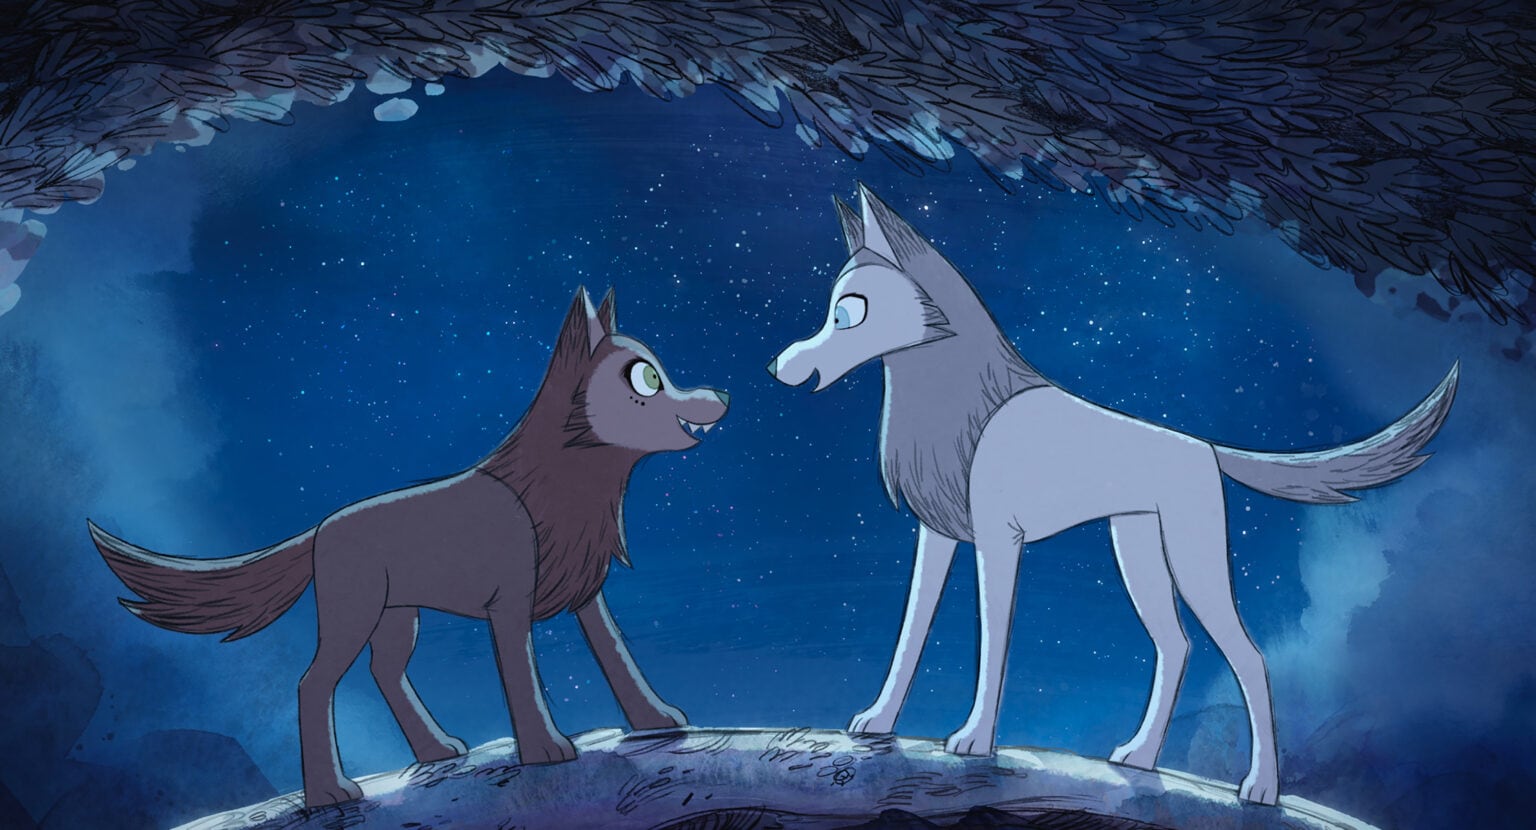 Apple TV+ enters the world of auteur animation with new animated film Wolfwalkers.